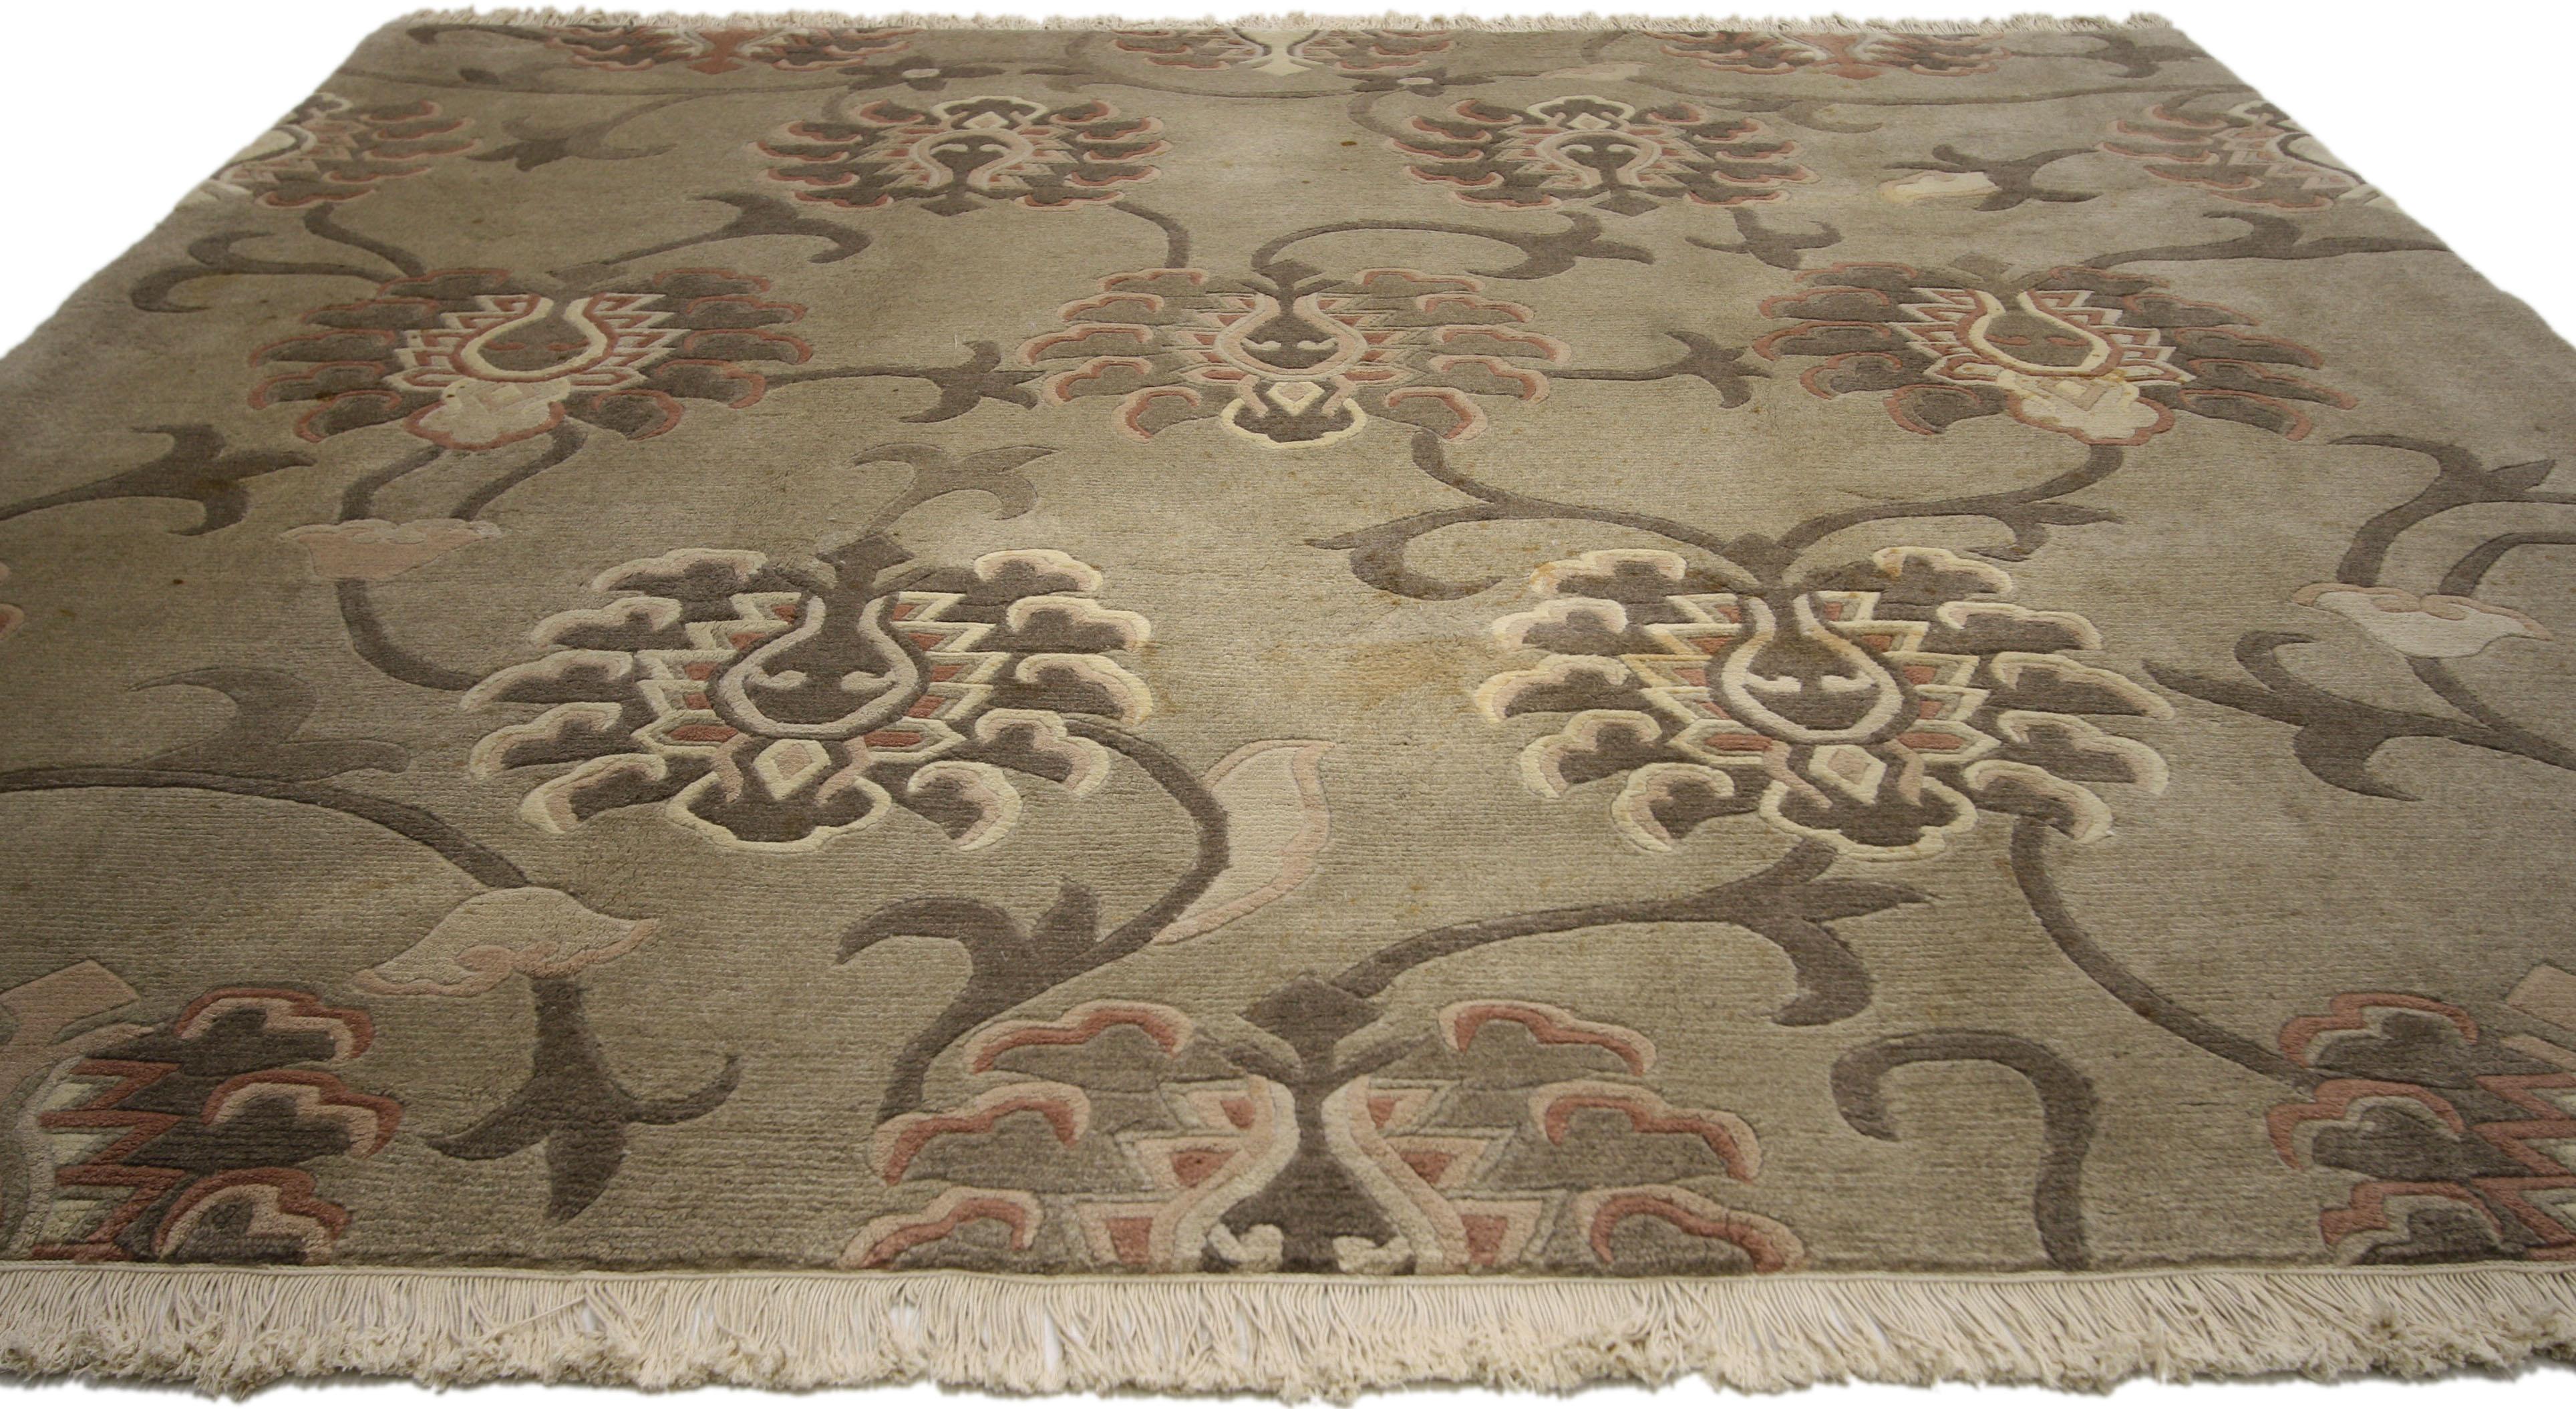 72906, Transitional style square vintage Tibetan rug with large-scale geometric flower pattern. This hand knotted wool Tibetan carpet features a large-scale flower pattern with large blossoming lilies and swirling tendrils on a warm gray backdrop.